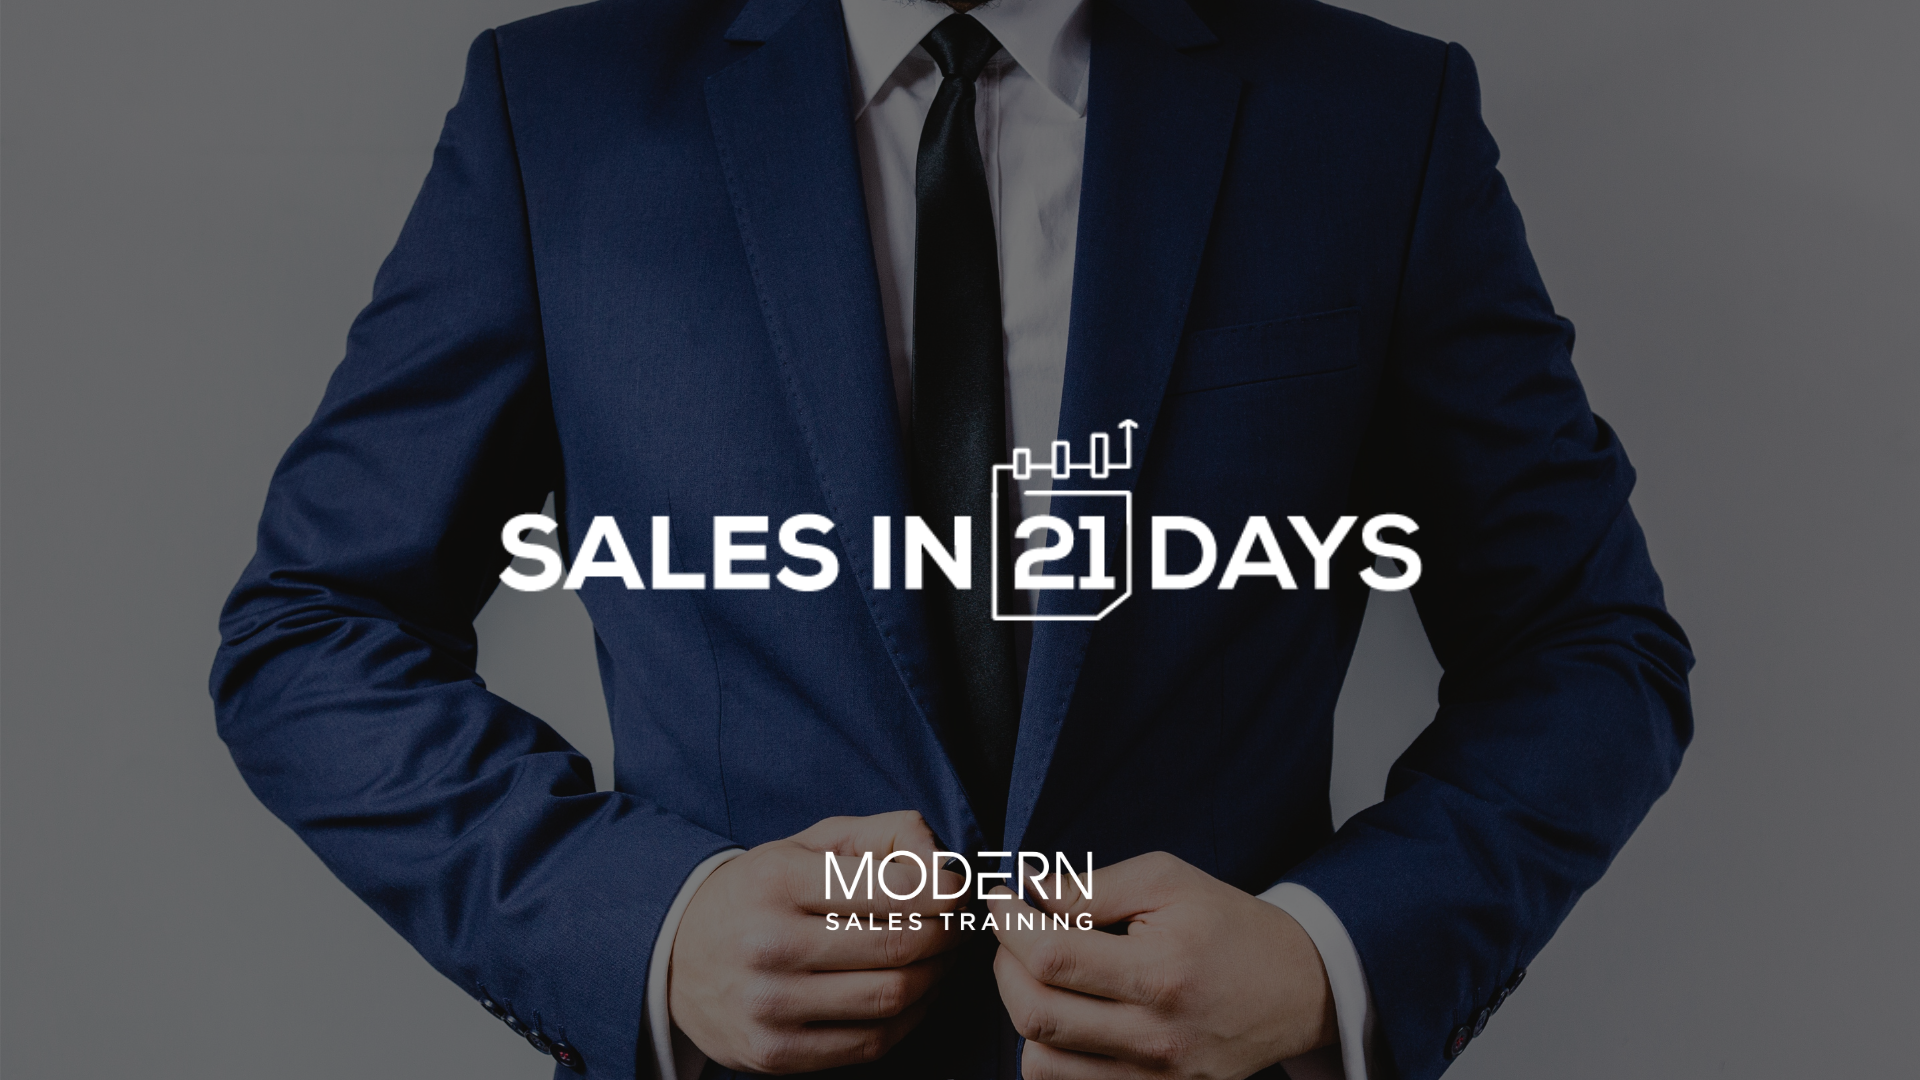 Learn Top Performer Sales Skills with The Sales In 21 Days course from Modern Sales Training